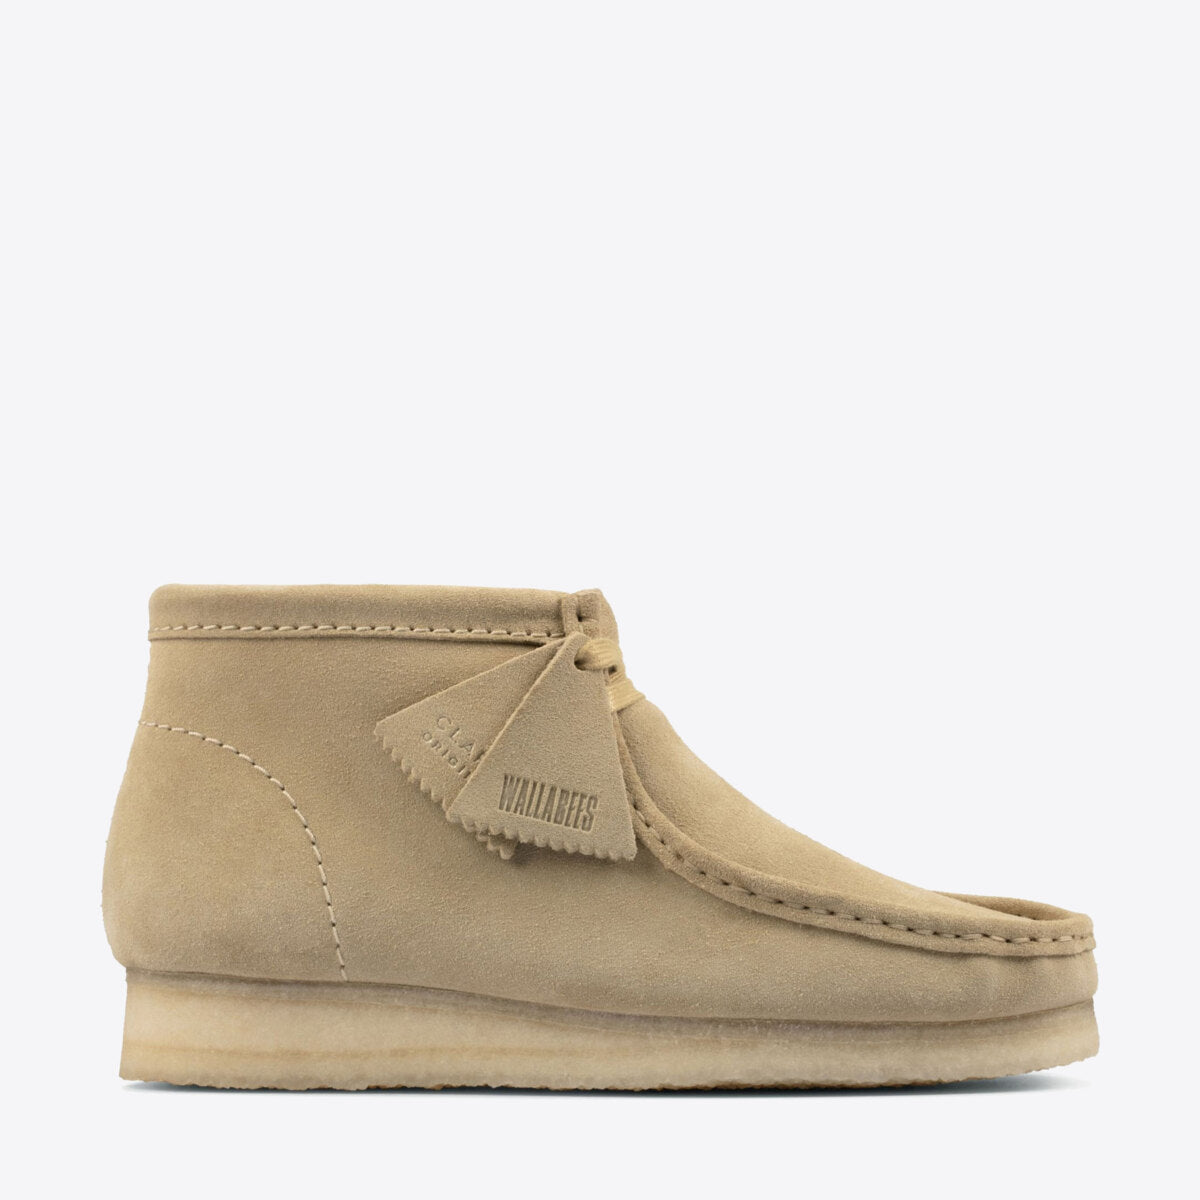 CLARKS Wallabee Boot Suede Maple - Image 1